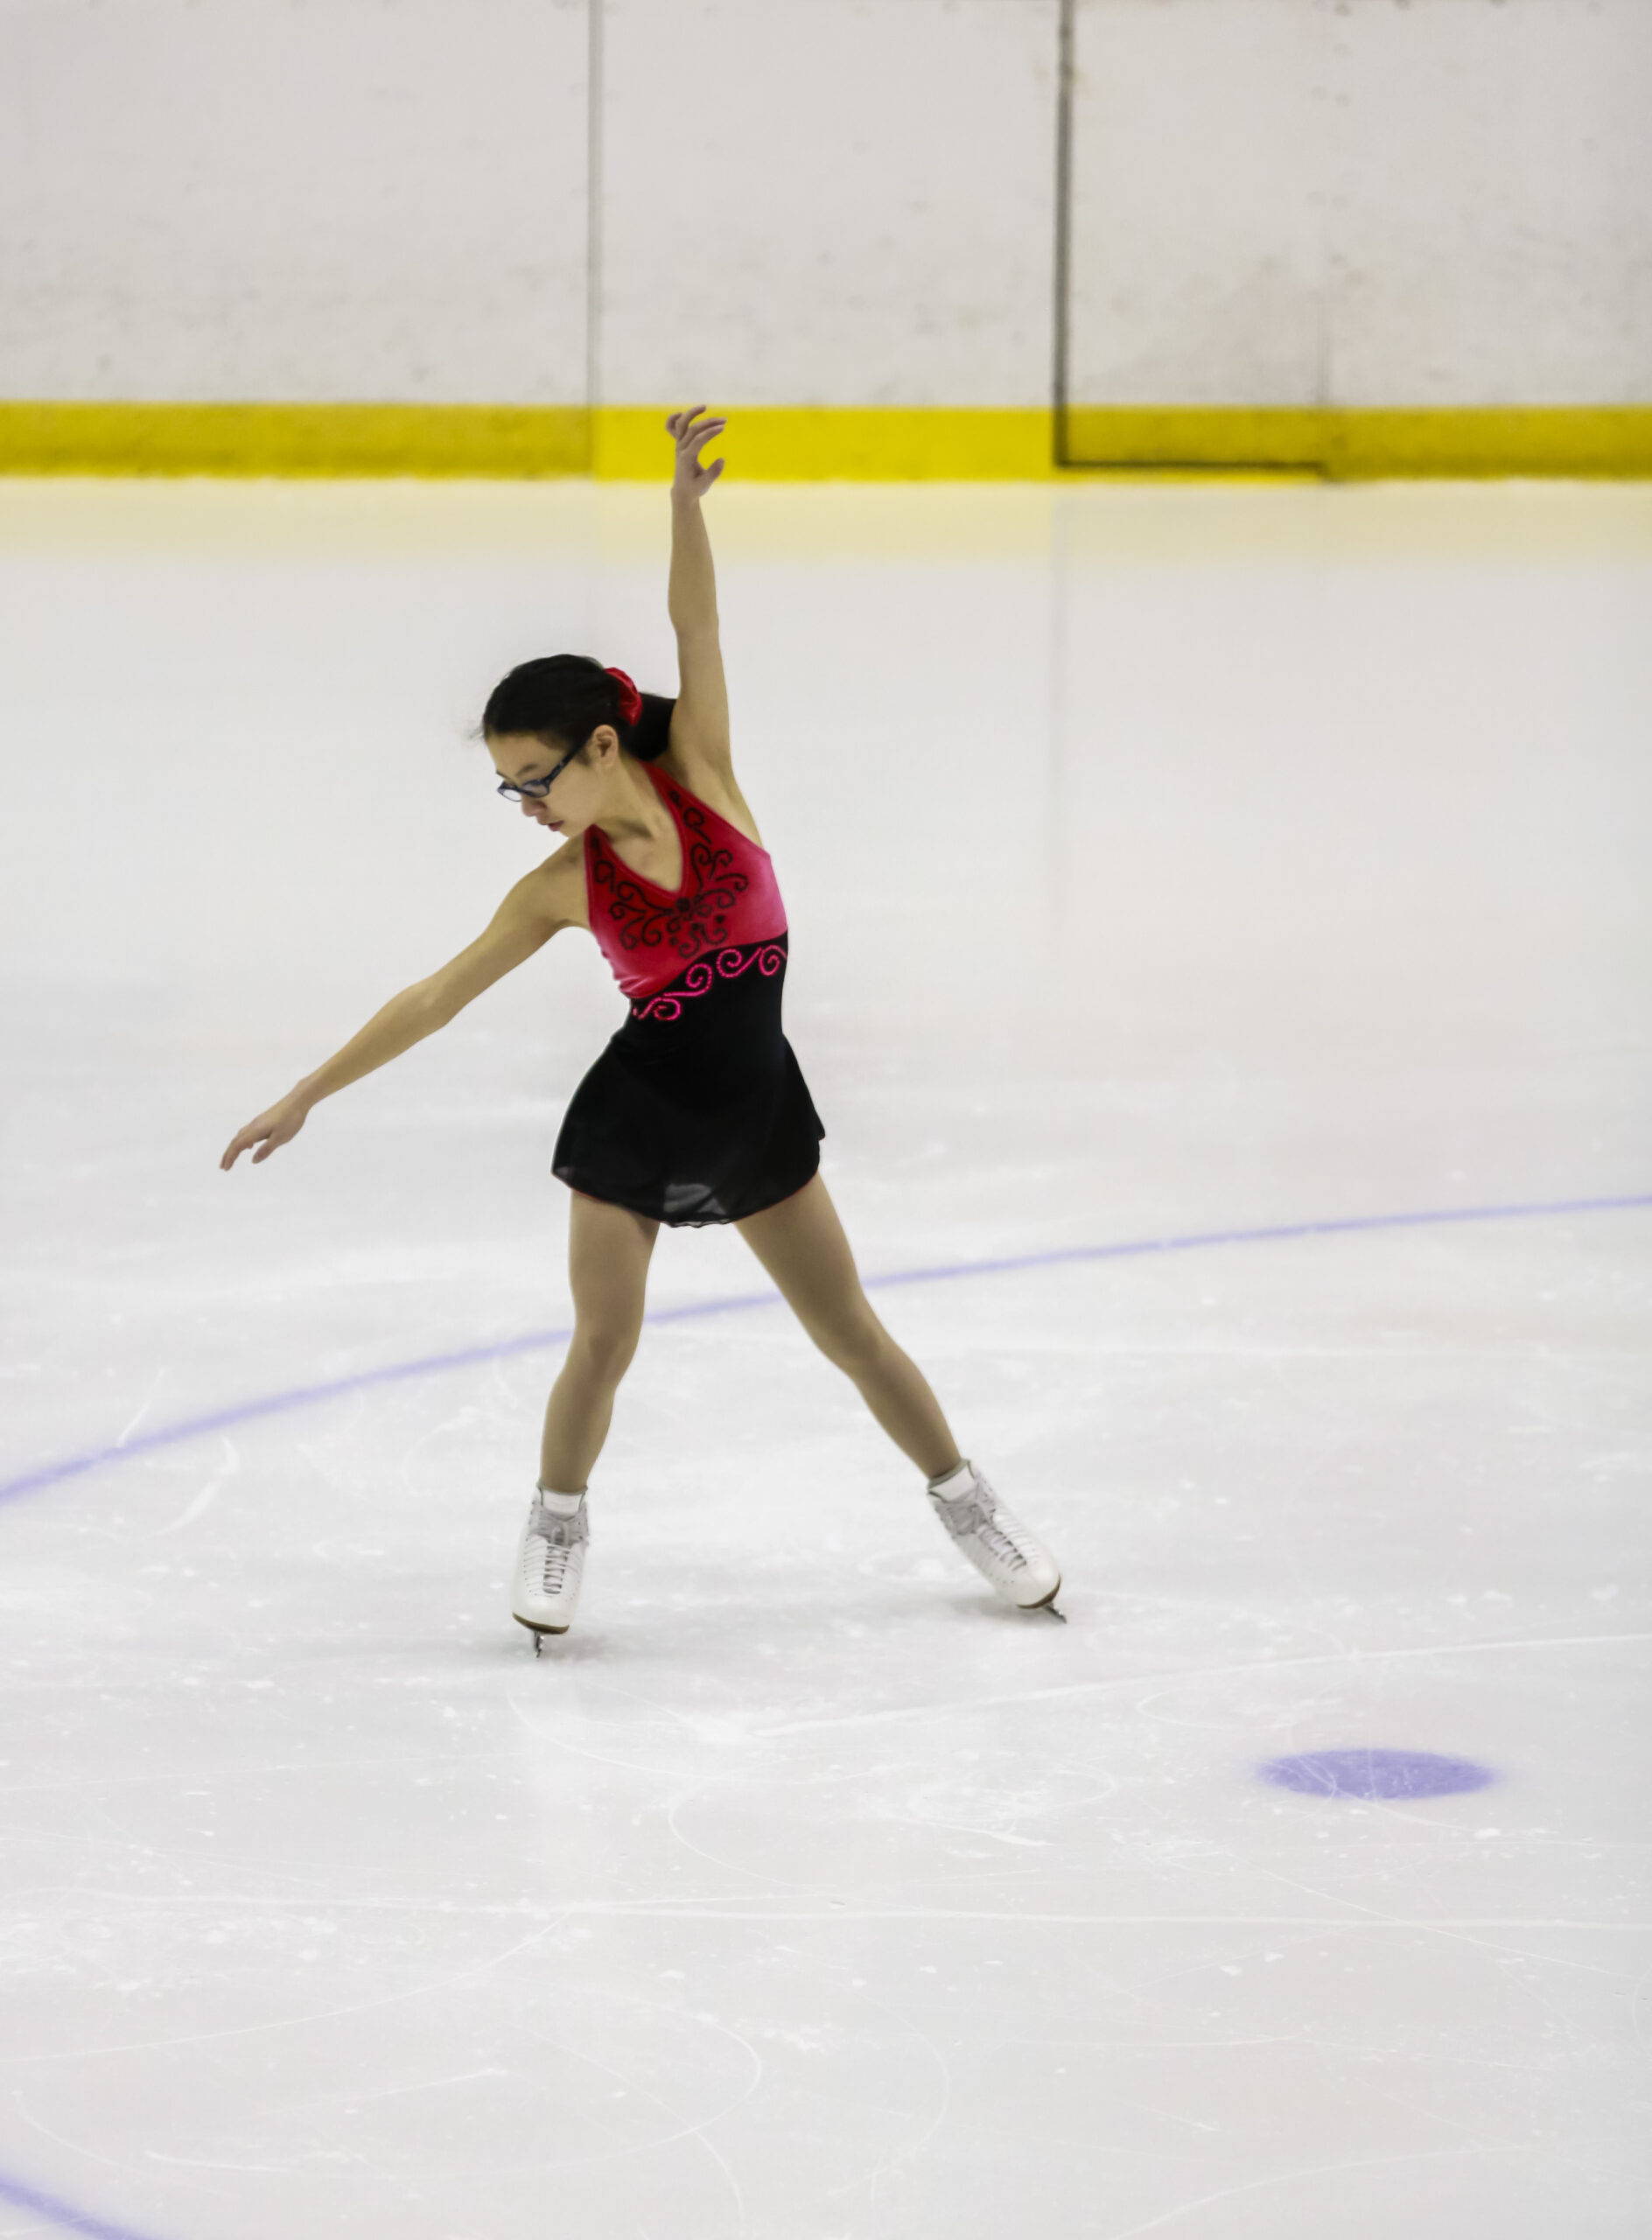 A photo of a figure skater posing on the ice during a figure skating performance.